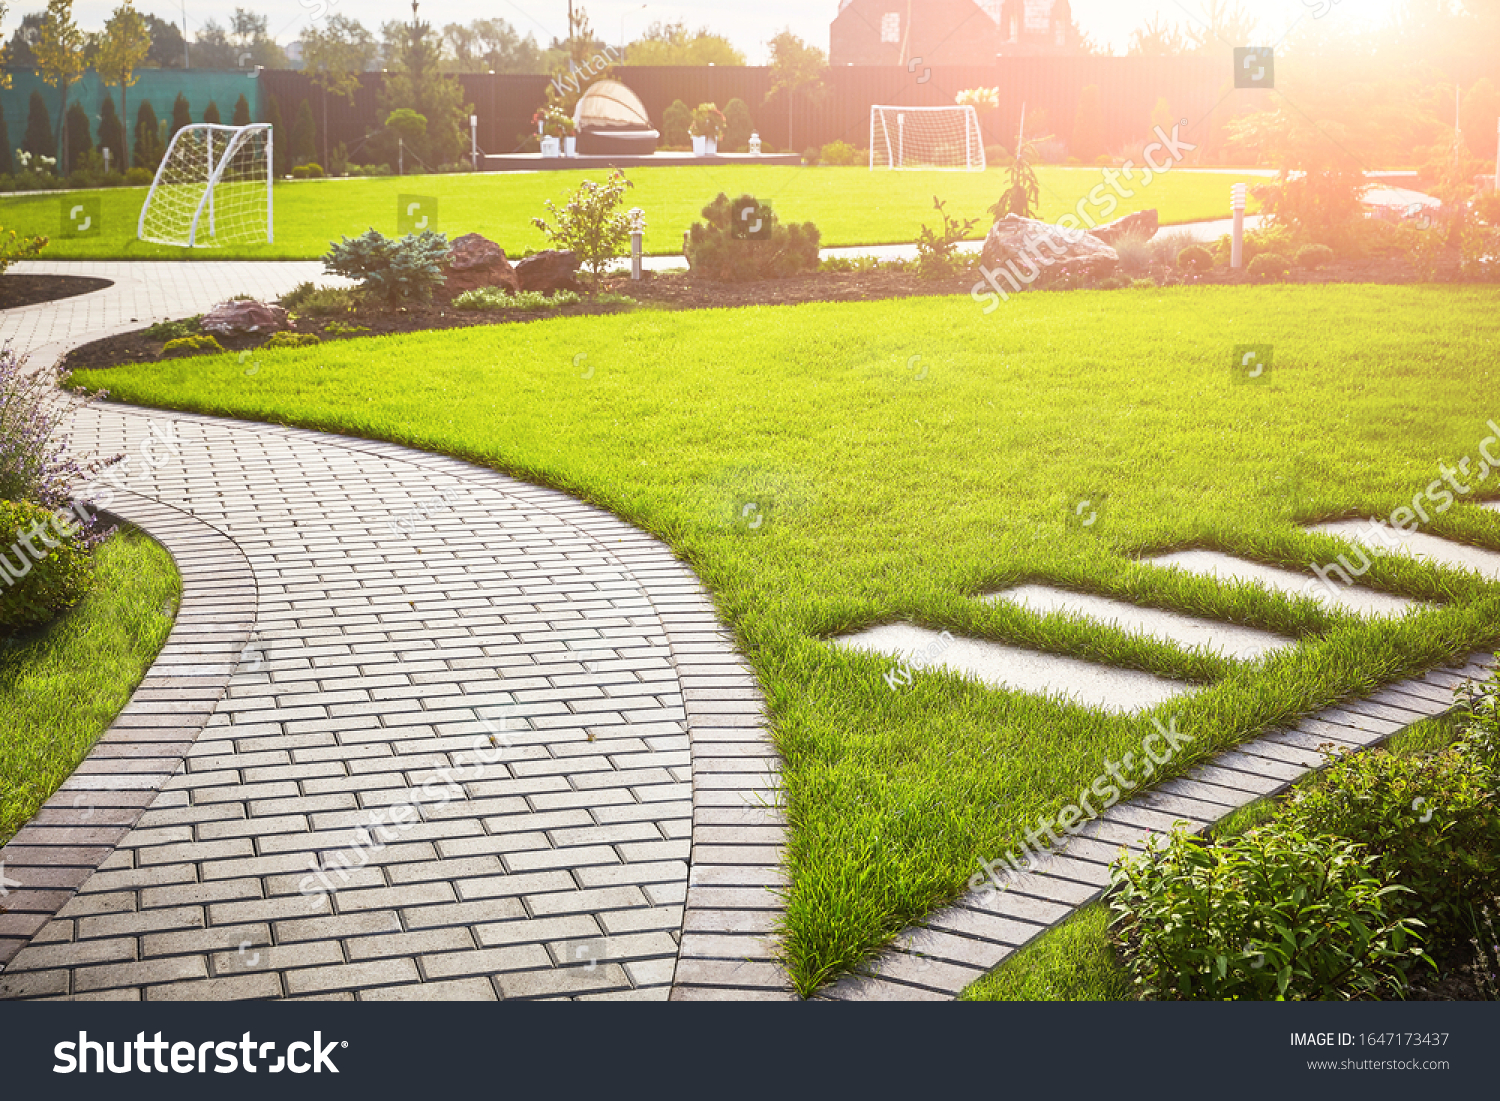 Landscaping of the garden. A tile path between green grass and a lawn with flowers in the sun. Soccer field in the background with copy space. #1647173437